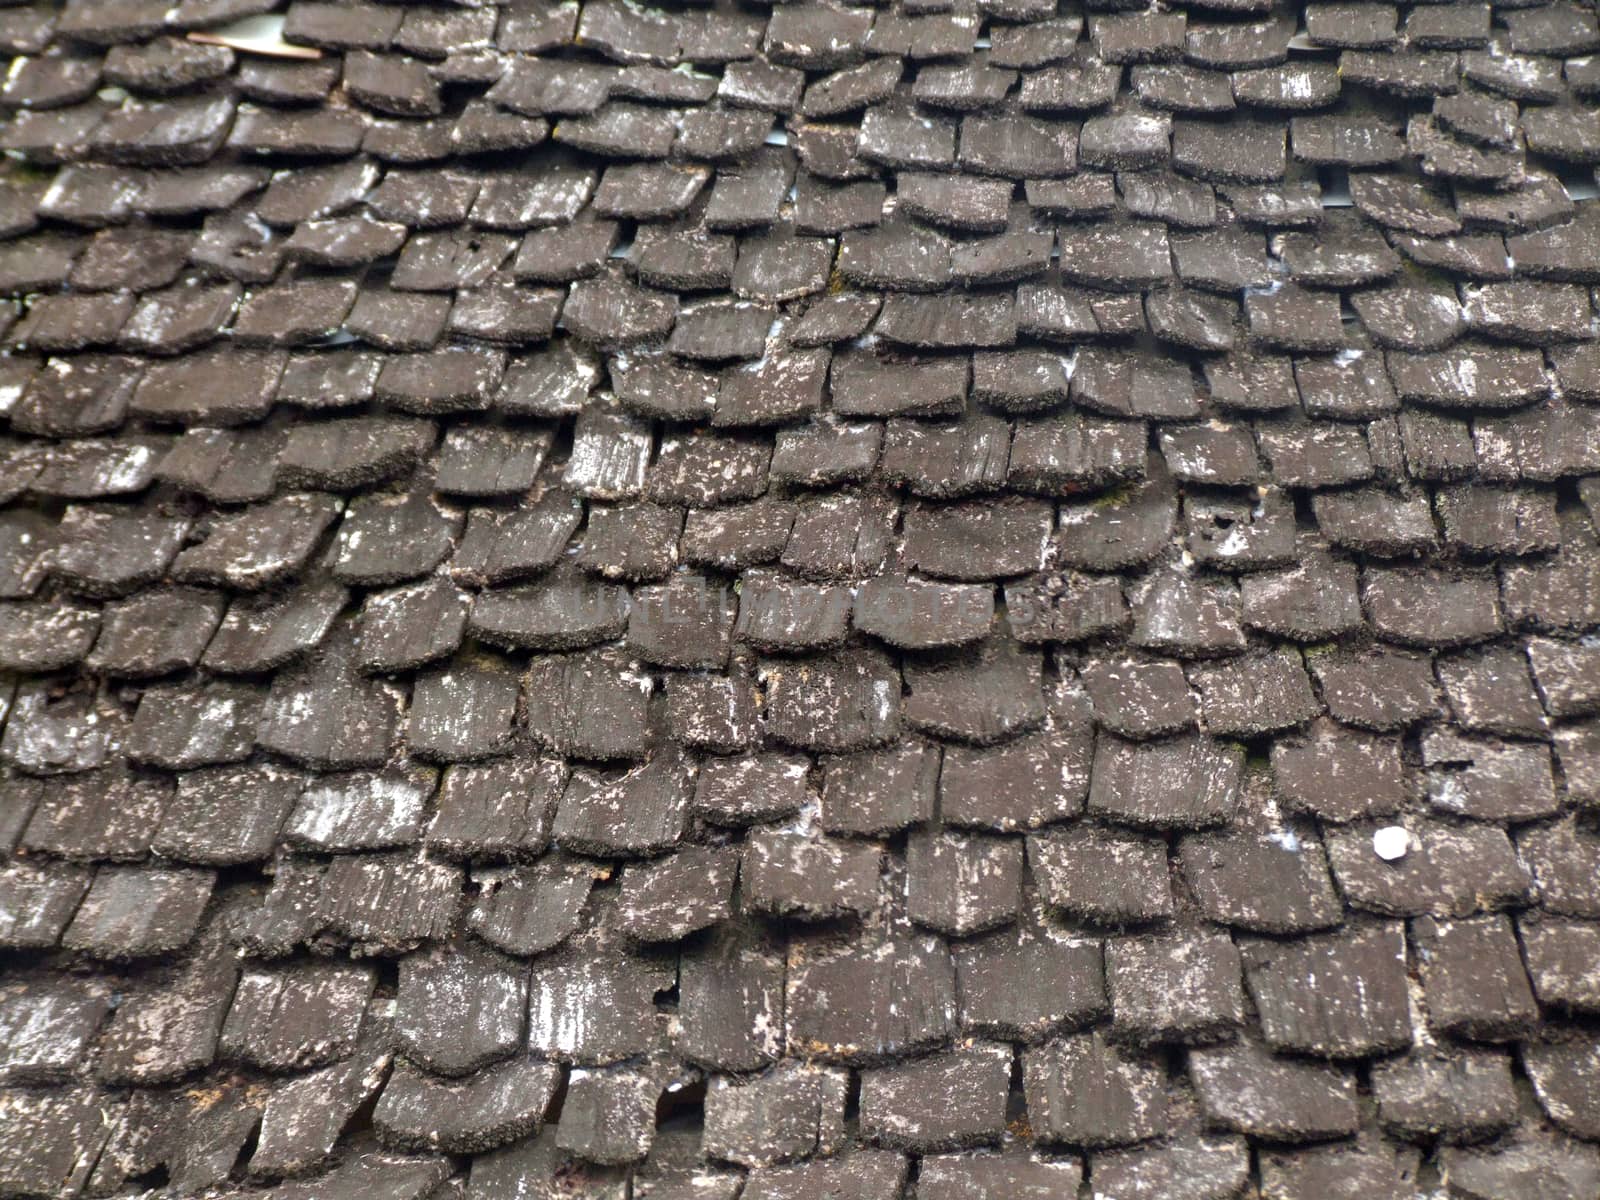 Wooden Roof Tiles by e22xua